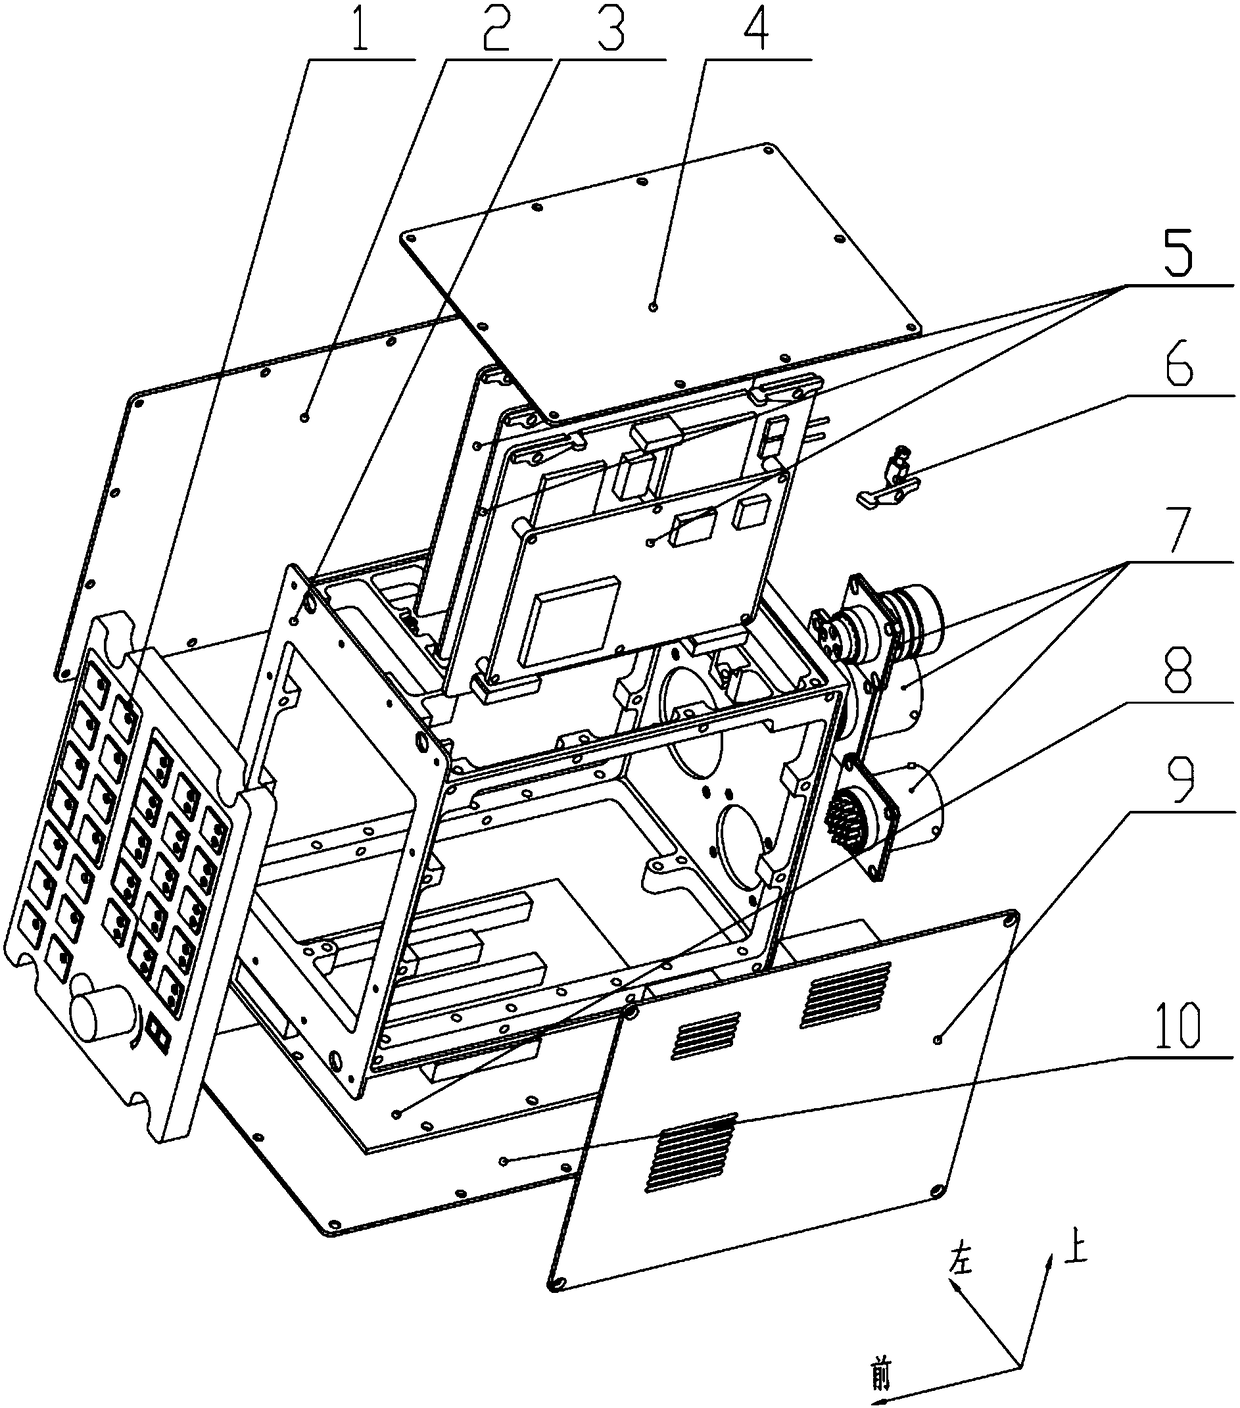 Mechanical shell of voice transmission equipment arranged on aircraft